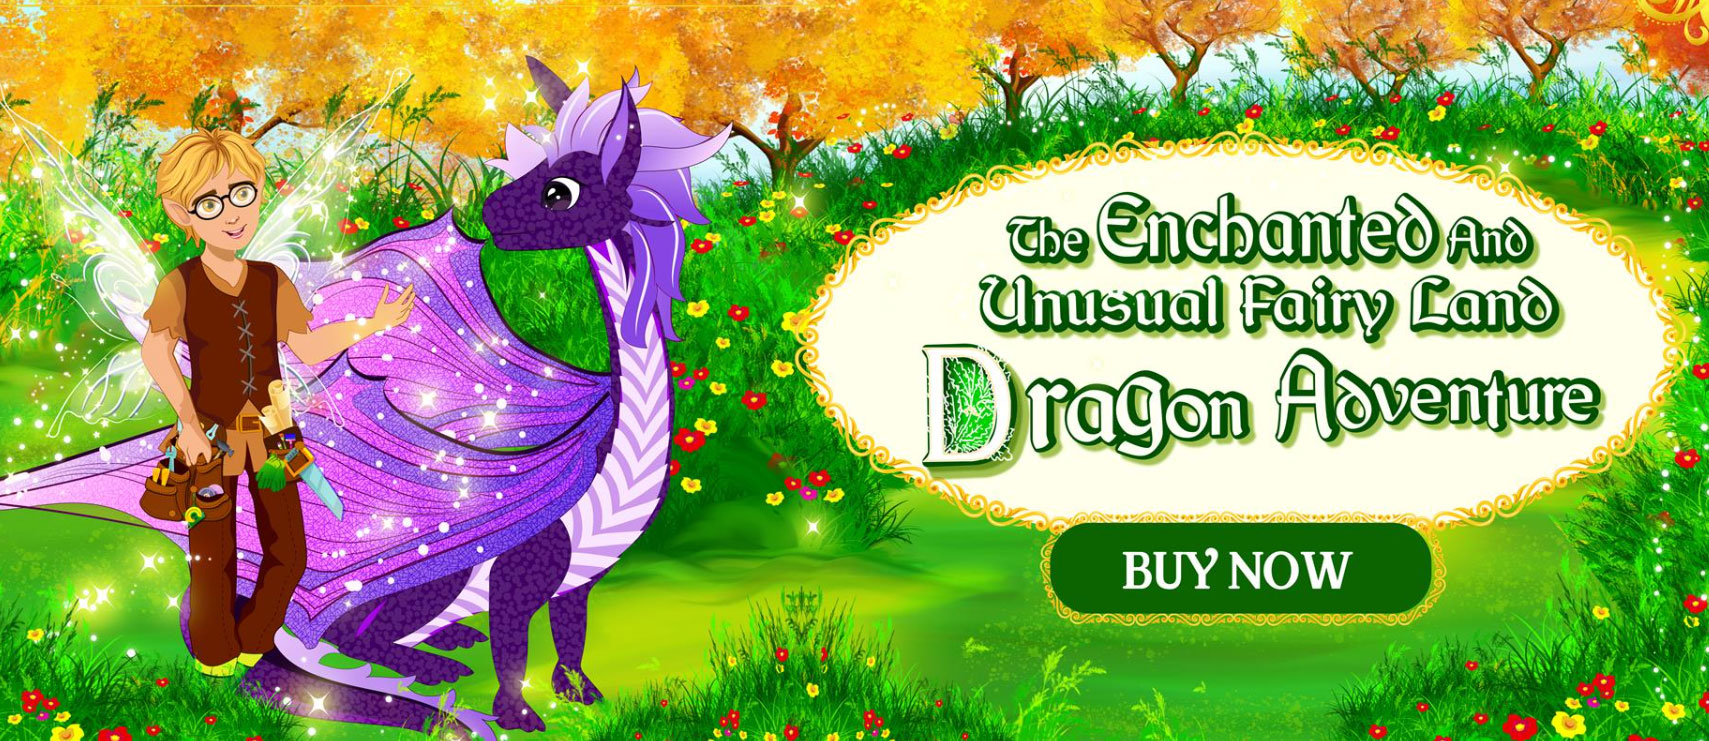 The Enchanted And Unusual Fairy Land Dragon Adventure